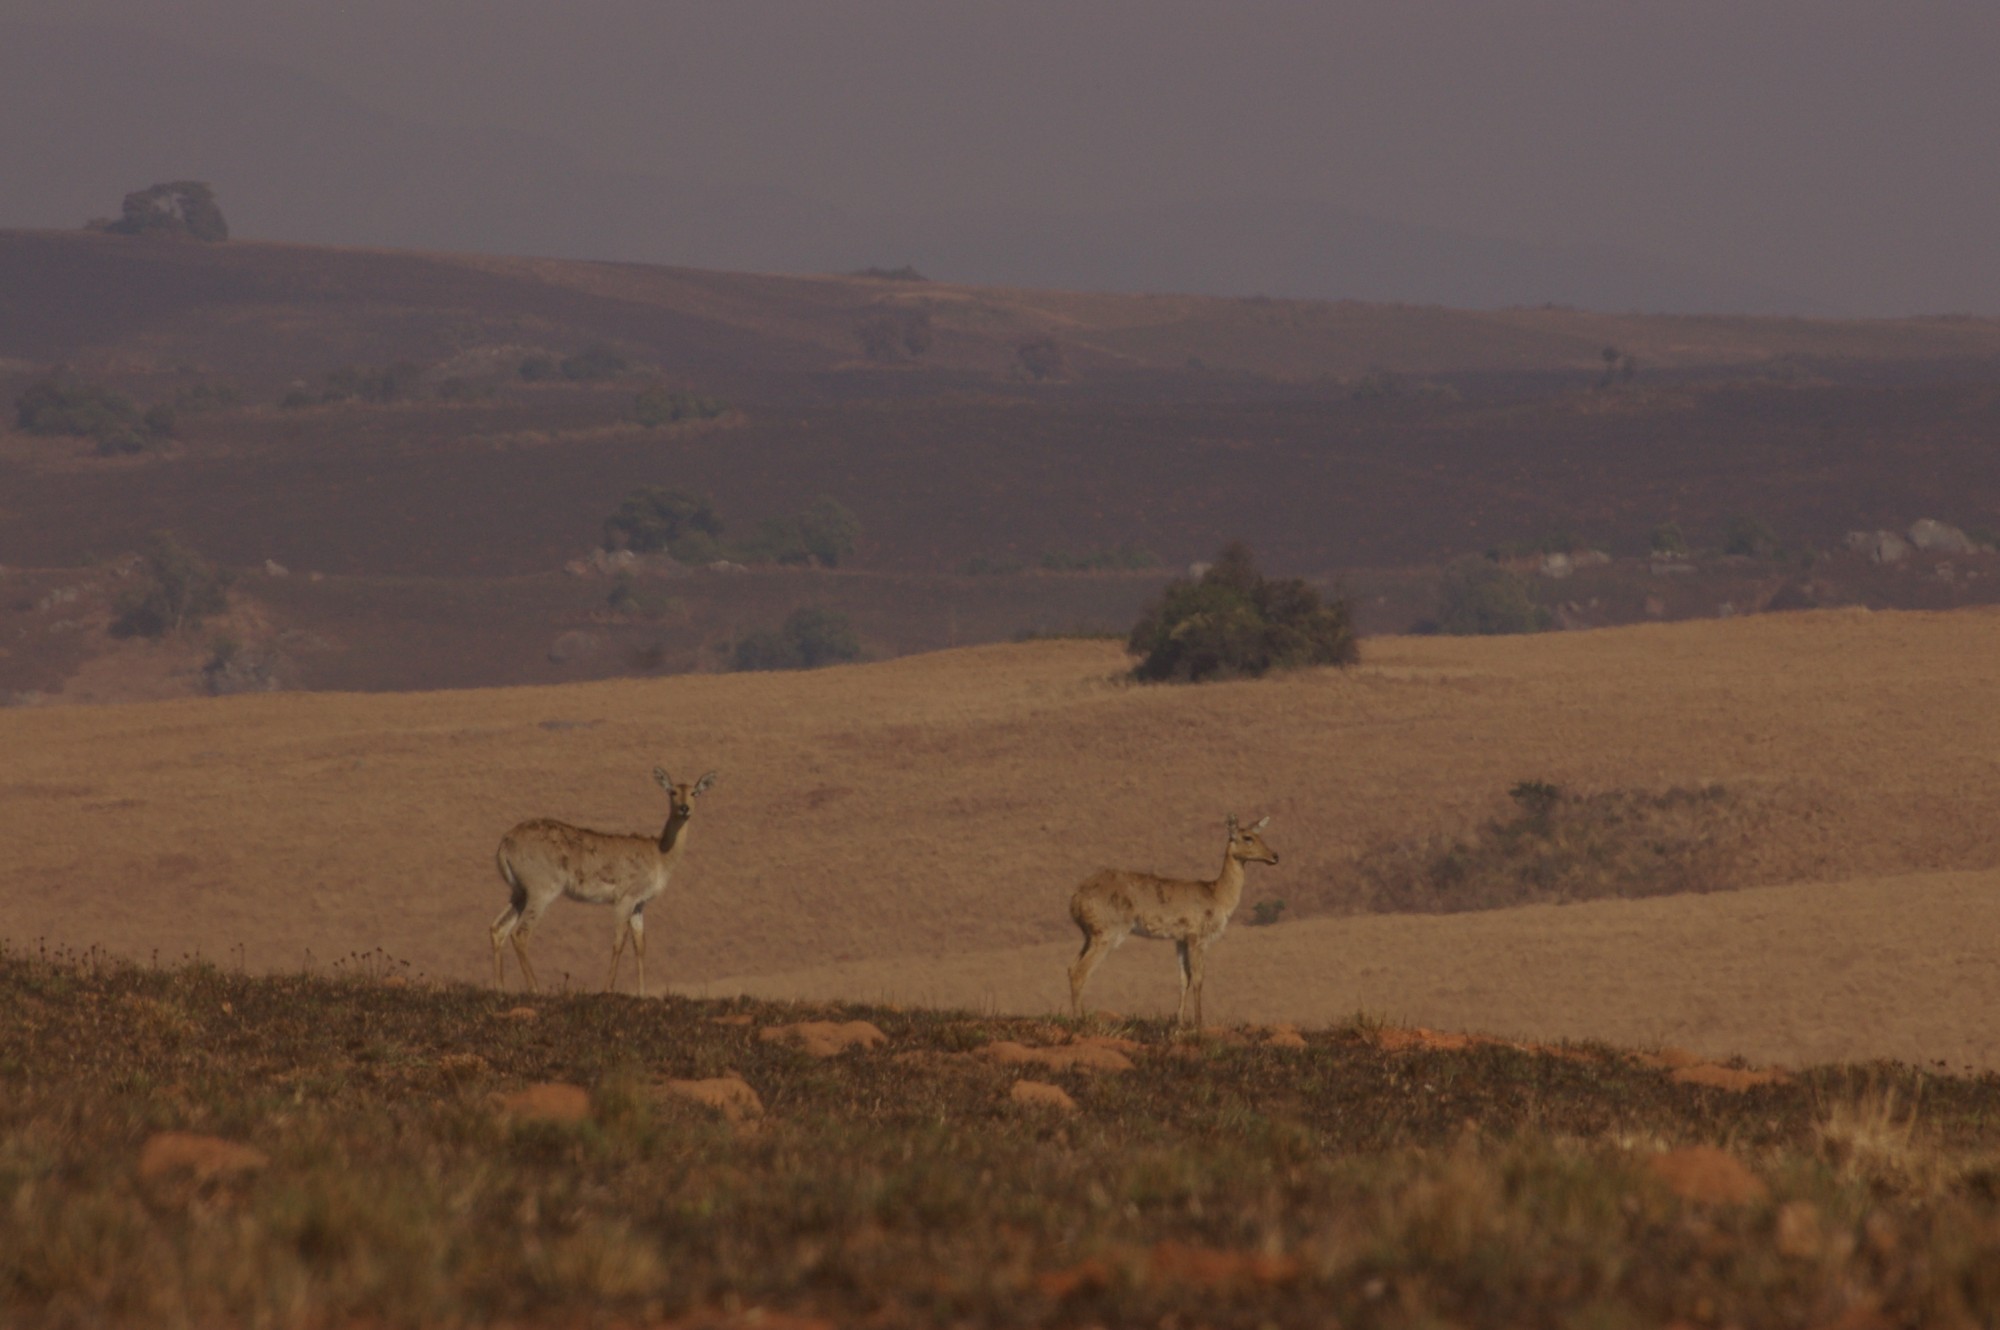 2 antelopes, sideways to the camera, brown so that they blend with the brown grasses of the rolling hills behind them.